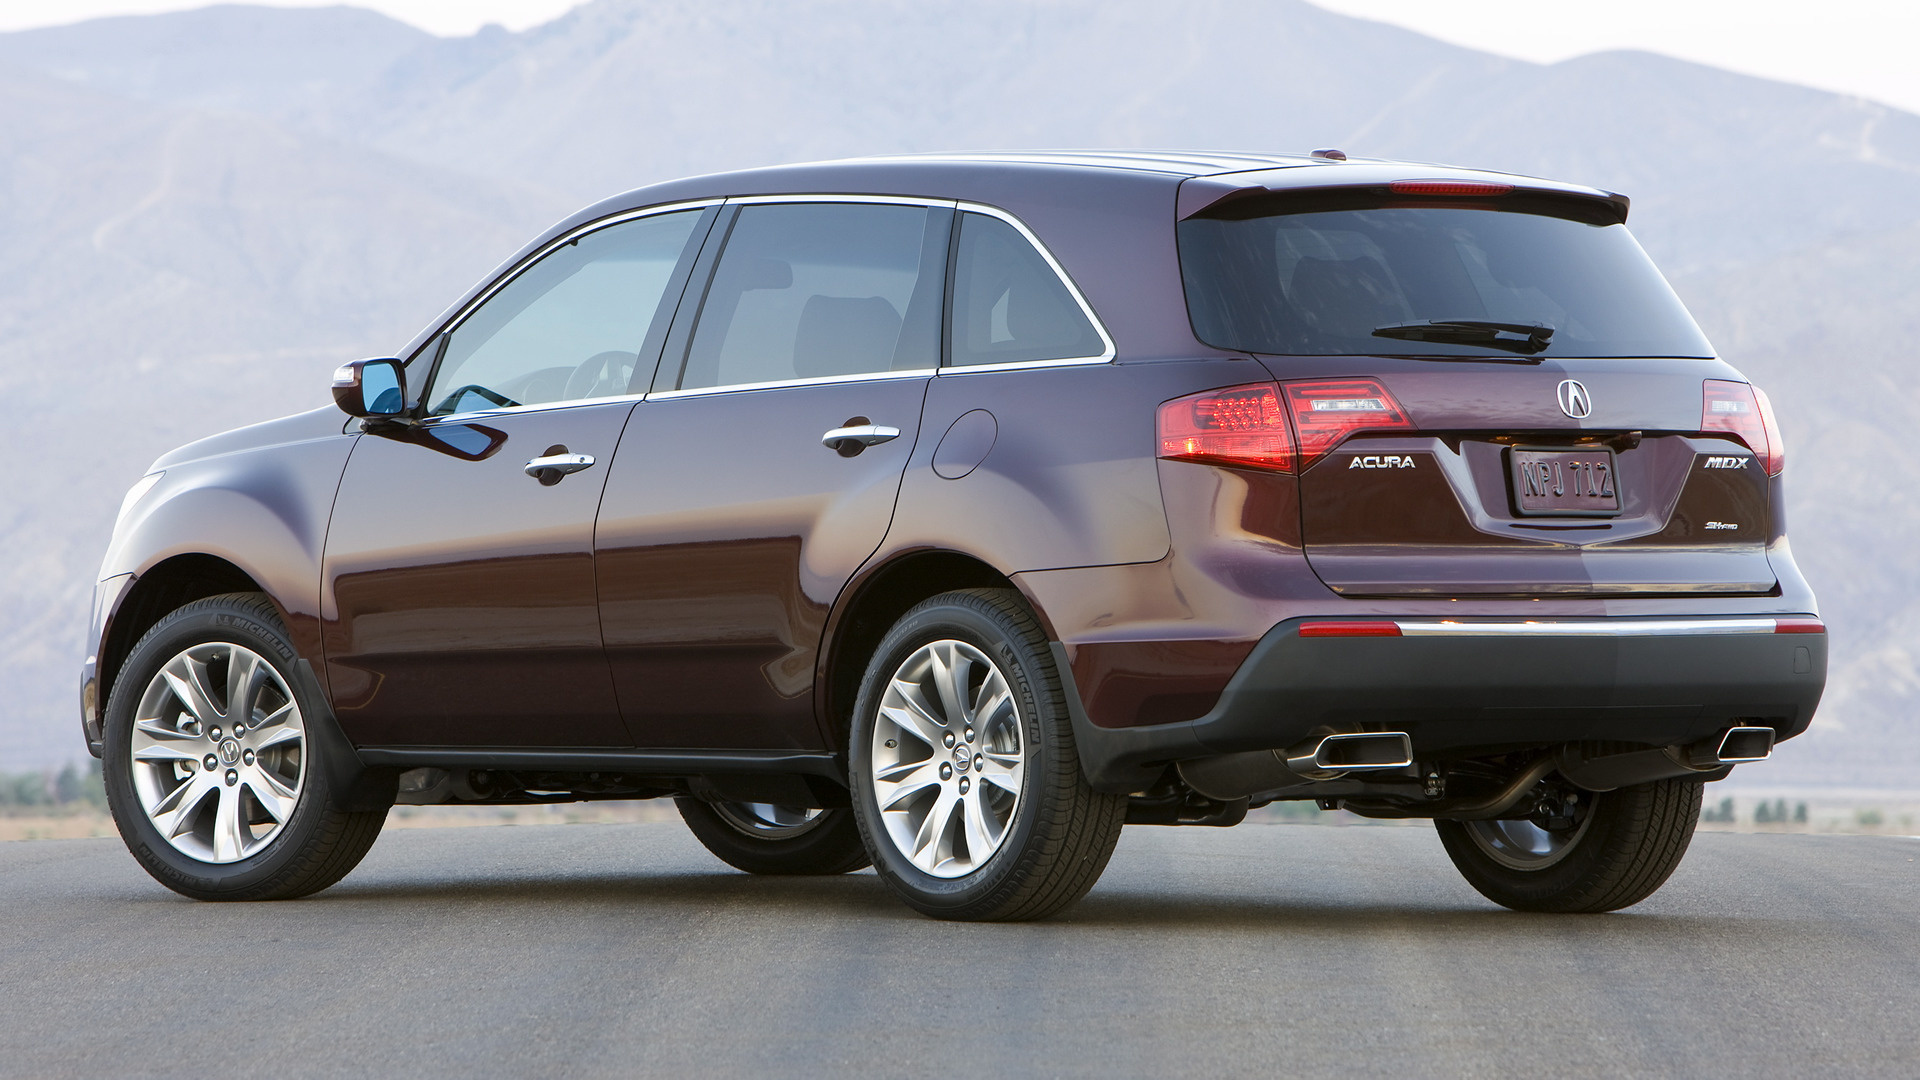 2010 Acura Mdx Wallpapers And Hd Images Car Pixel